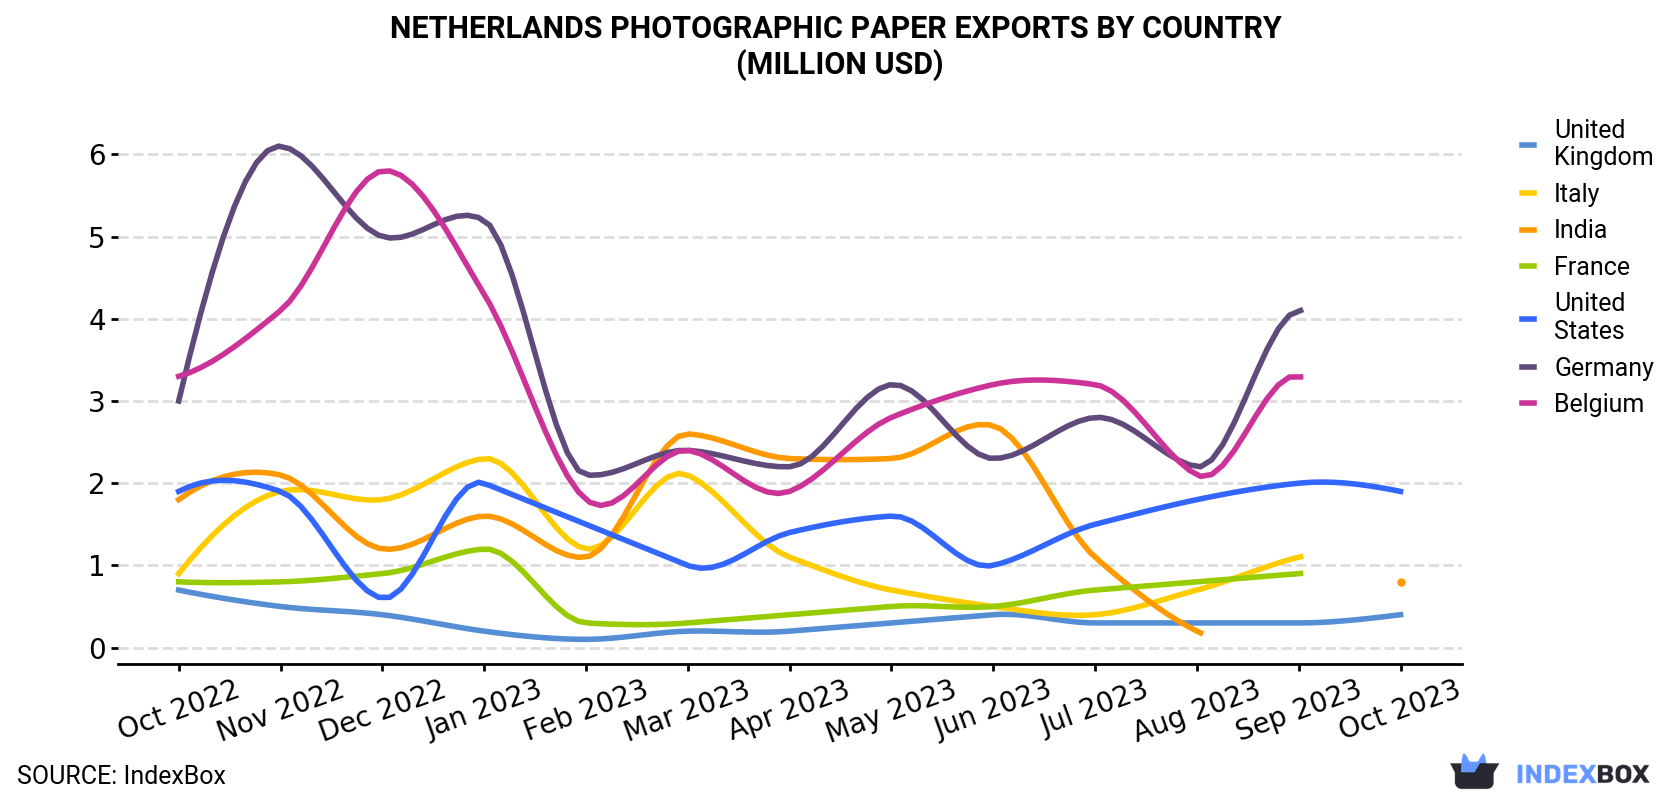 Netherlands Photographic Paper Exports By Country (Million USD)